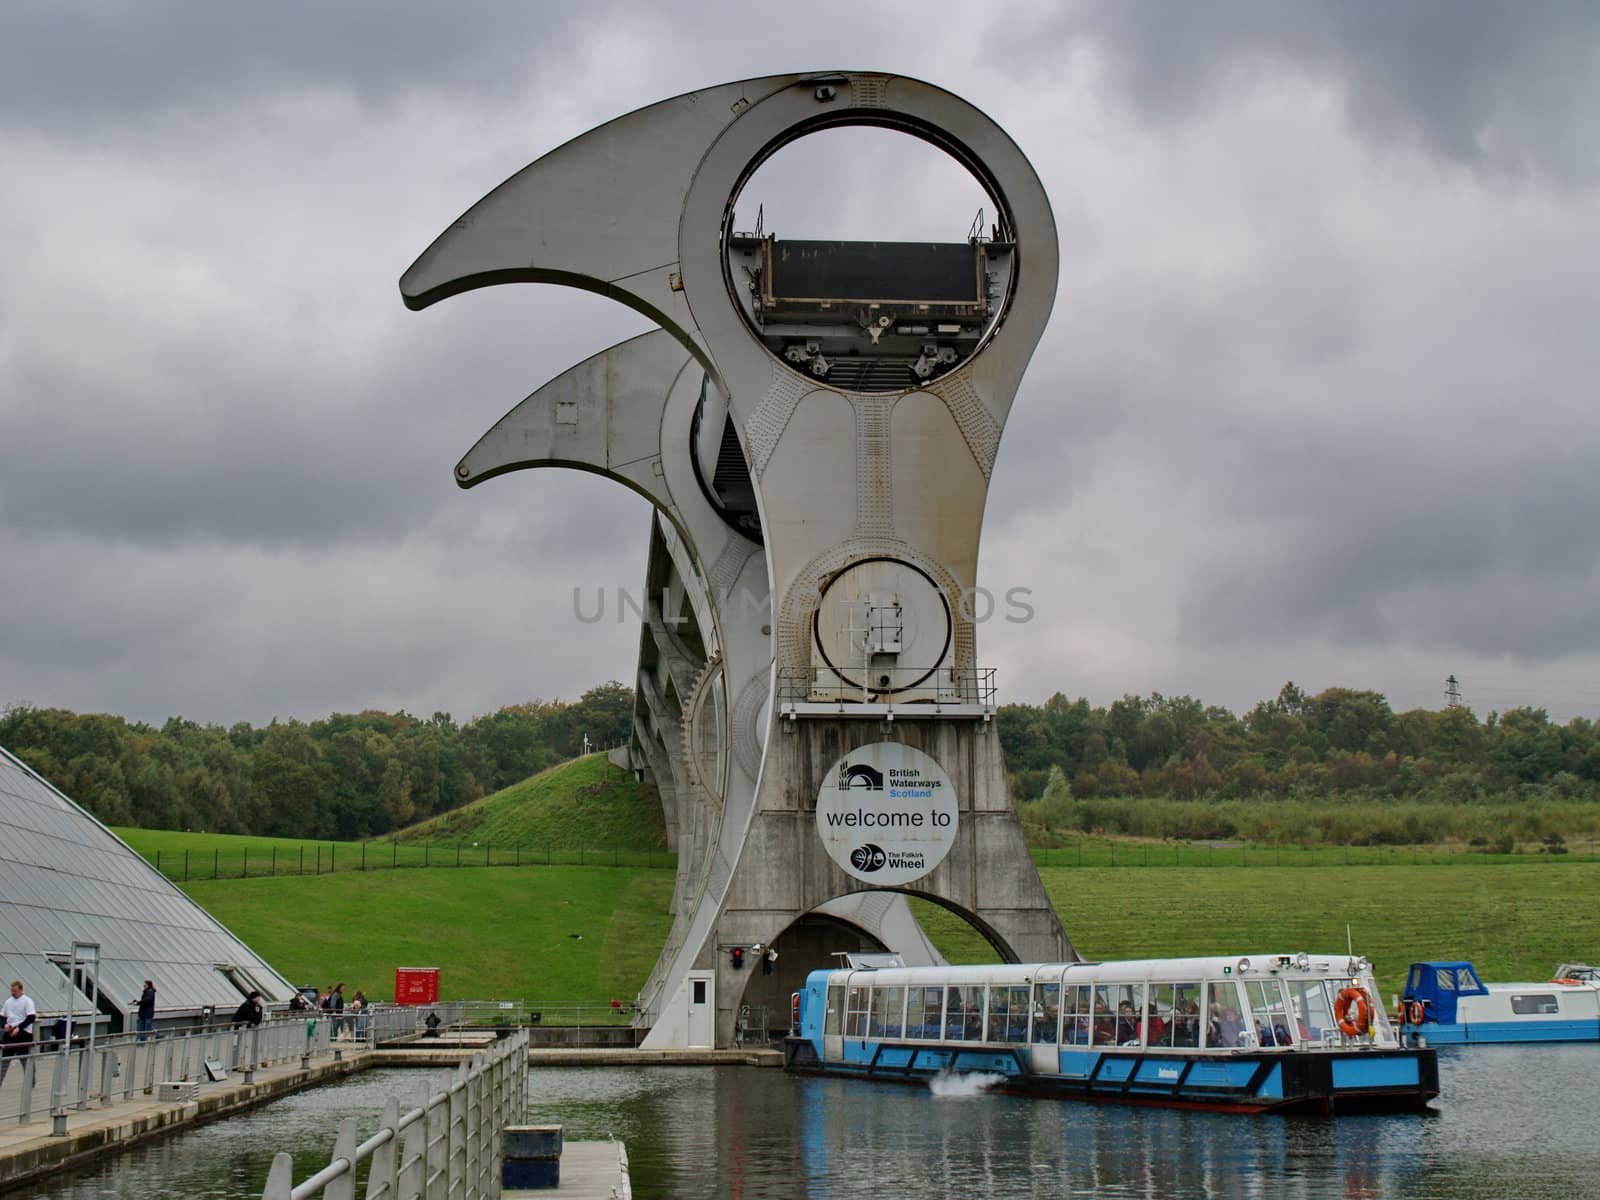 FALKIRK - OCTOBER 18:View of the Falkirk Wheel on October 18, 20 by anderm